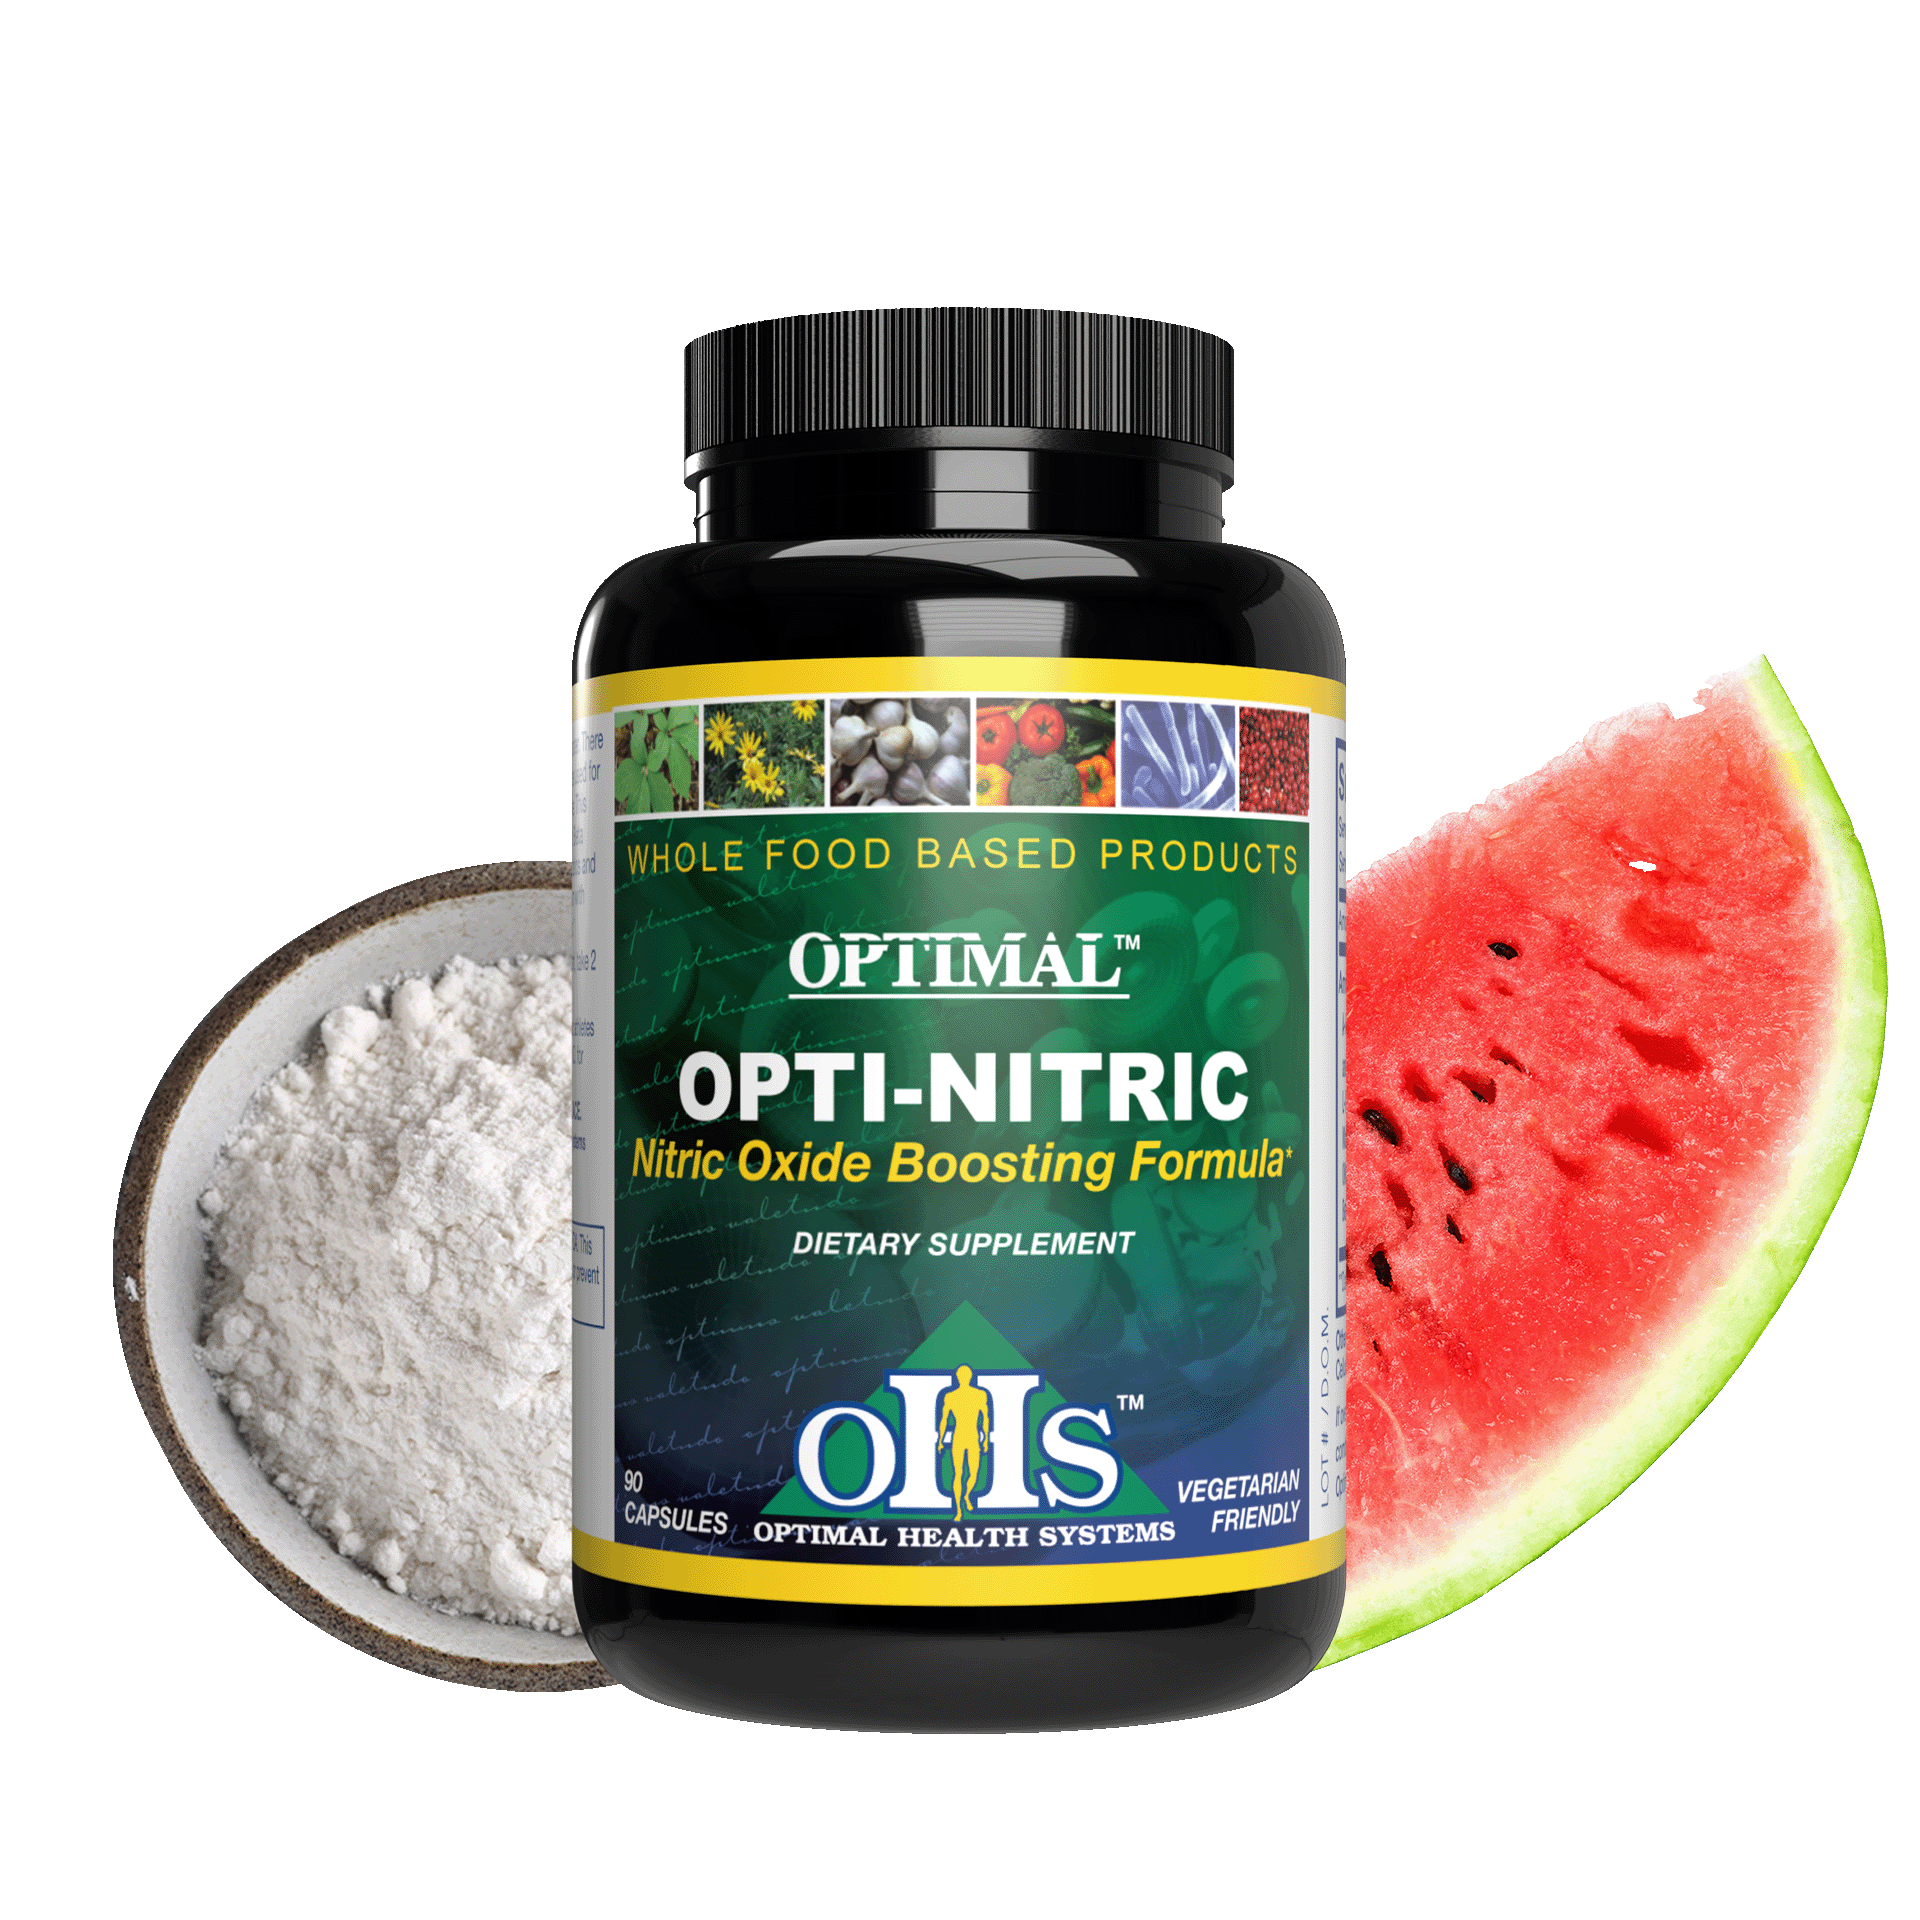 Image of a bottle of Optimal Opti-Nitric. behind the bottle is a watermelon slice and Arginine powder.